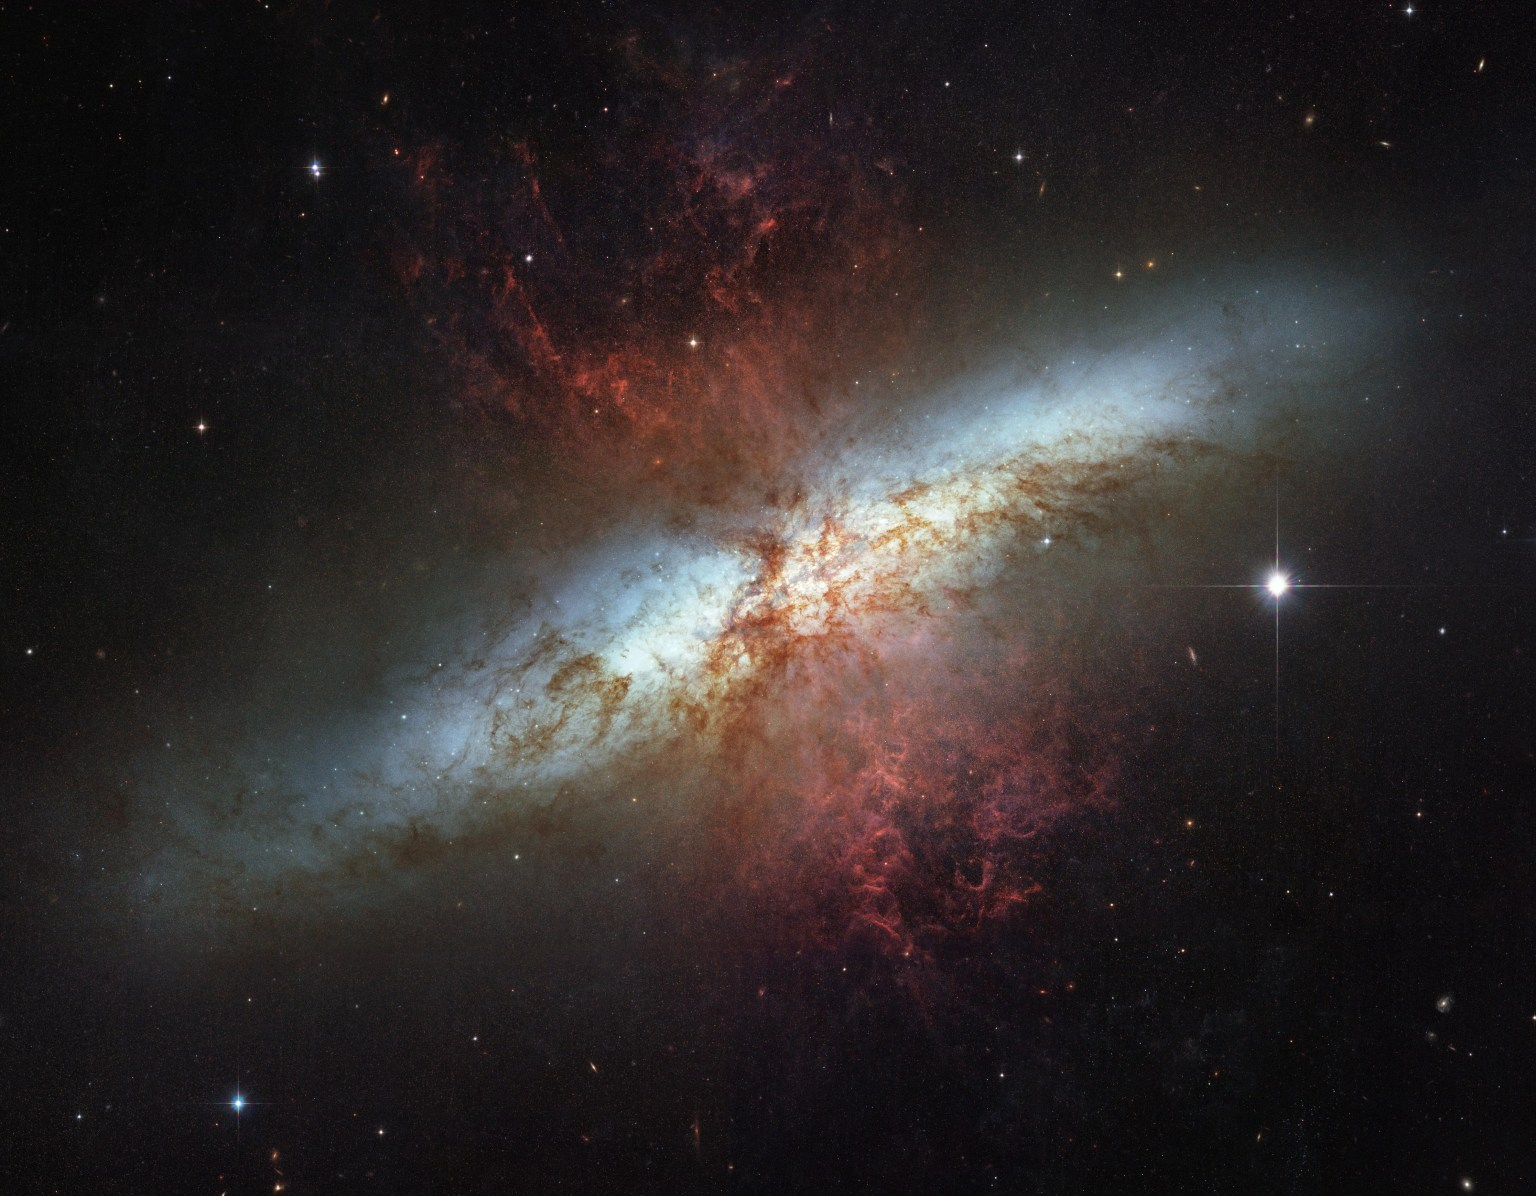 A white band of stars that cuts across a black background, from the lower left to the upper right, is the galaxy M82. Reddish brown gas and dust overlays the galaxy concentrated in the center of the image and fanning out above and below the white band of the galaxy. Black background is dotted with stars.